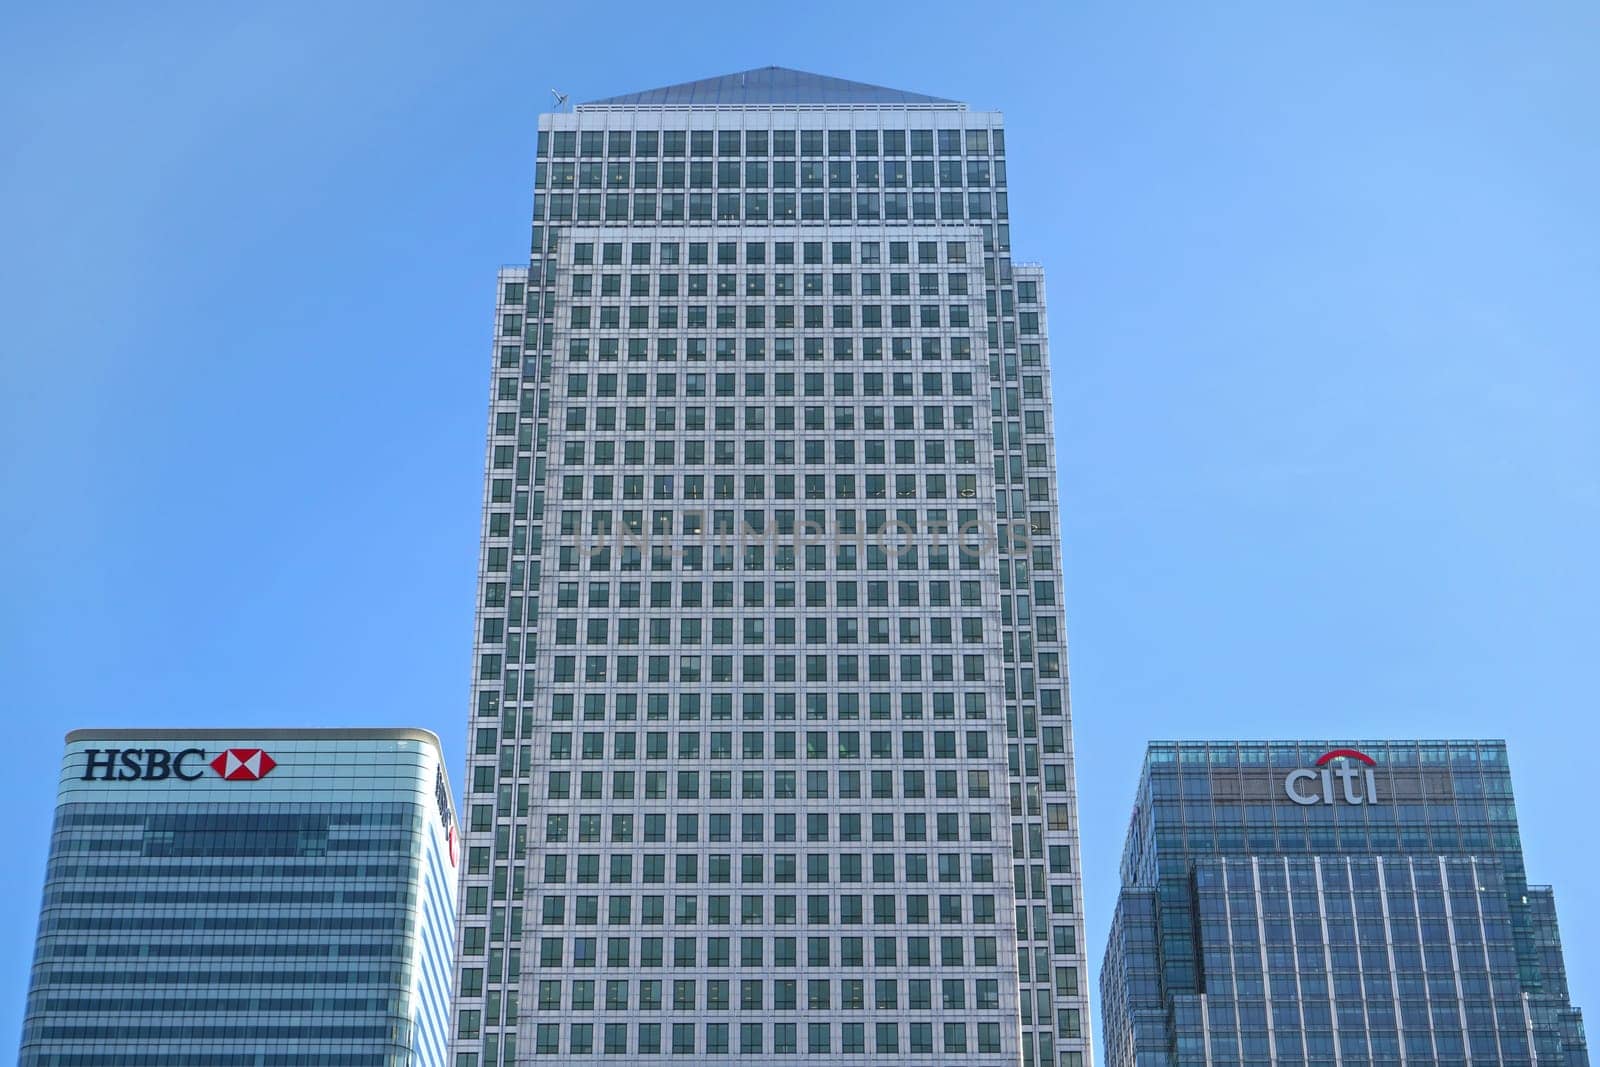 London, United Kingdom - February 03, 2019: Skyscrapers at Canary Wharf - One Canada Square building in middle, HSBC and Citi bank on sides. Many financial companies resides in this part of London by Ivanko